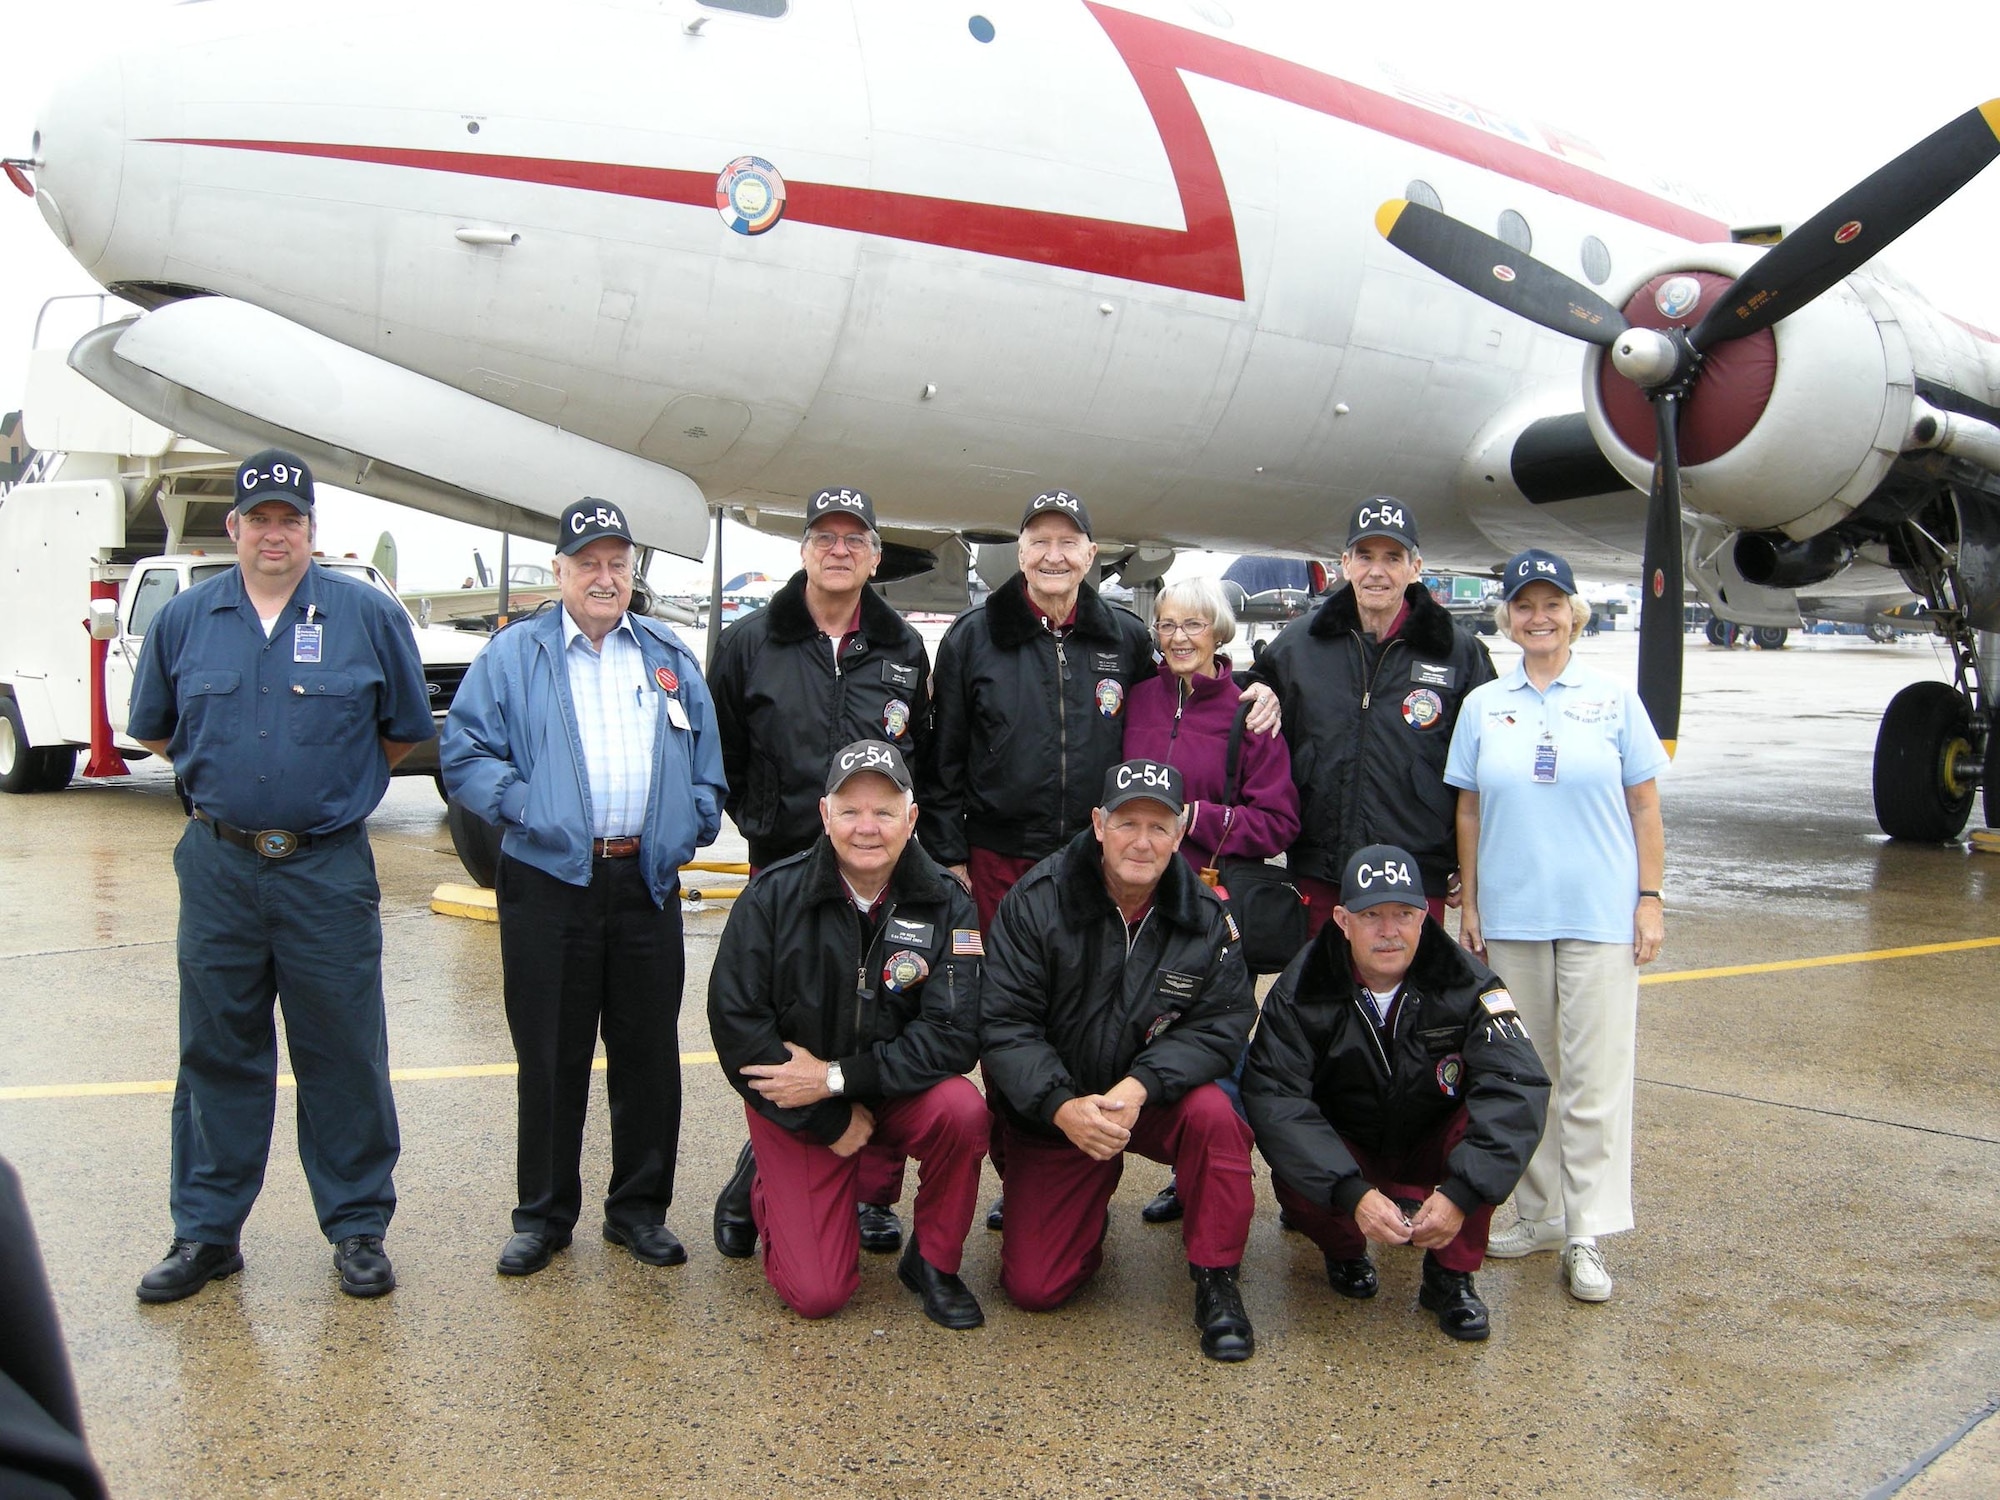 ANDREWS AIR FORCE BASE, Md. -- Members of the the Berlin Airlift Historical Foundation pose with Retired Col. Gail Halvorsen (center) and his wife Lorraine (third from right) at the Joint Service Open House here May 18. Colonel Halvorsen earned the nickname the "Candy Bomber" for dropping more than 20 tons of candy to local children in Berlin, Germany, between 1948 and 1949.  The BAHF stands before the C-54E transport aircraft dubbed, "The Spirit of Freedom." The foundation is dedicated to preserving the memory and legacy of a key humanitarian and aviation historical event, The Berlin Airlift. (U.S. Air Force photo/Staff Sgt. Amaani Lyle)